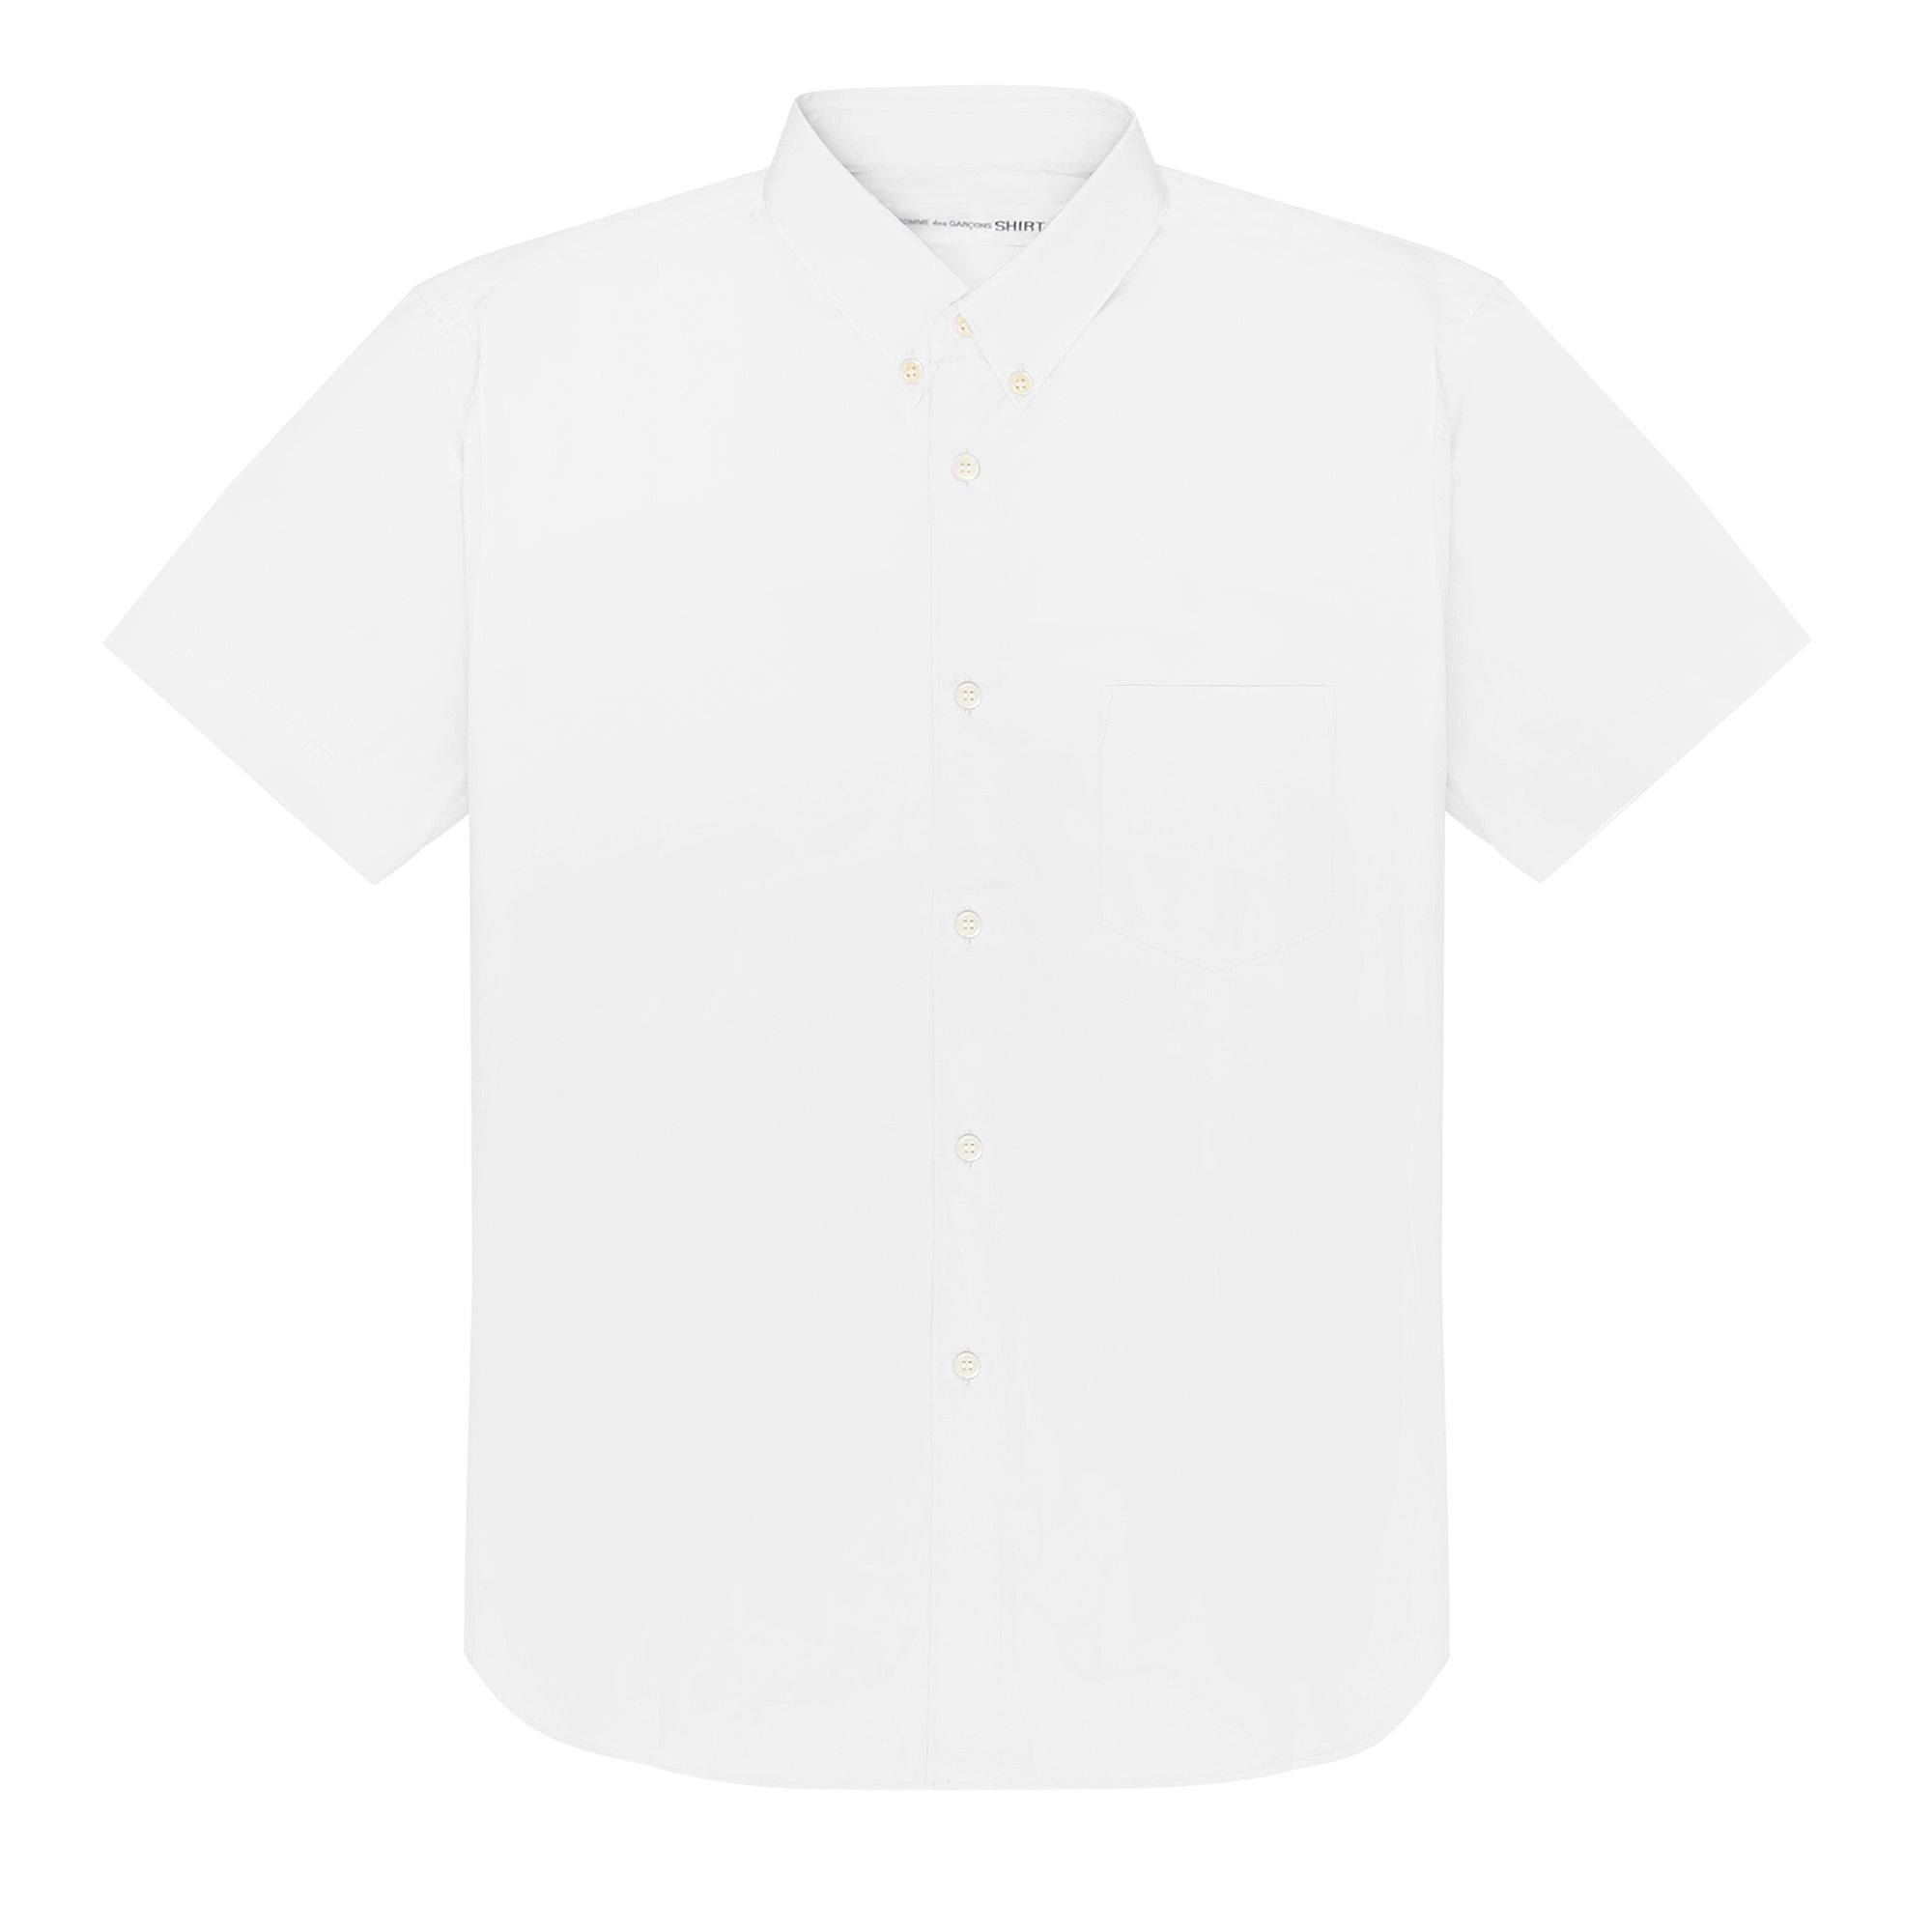 CDG SHIRT FOREVER - Button down oxford S/S Shirt CDGS8PLC - (White) view 1